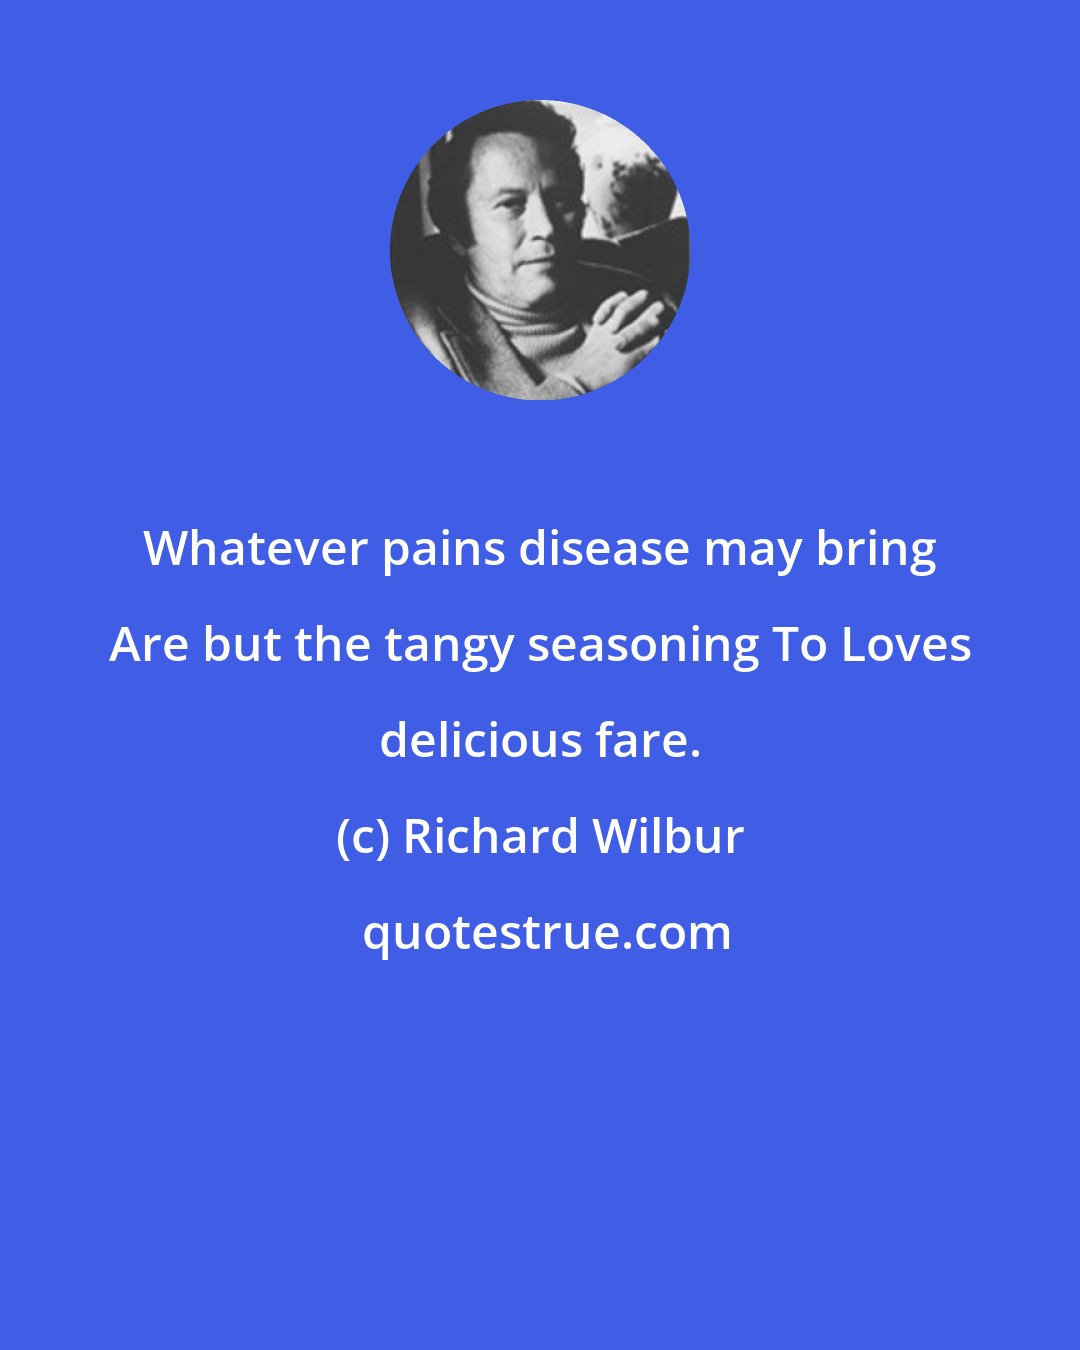 Richard Wilbur: Whatever pains disease may bring Are but the tangy seasoning To Loves delicious fare.